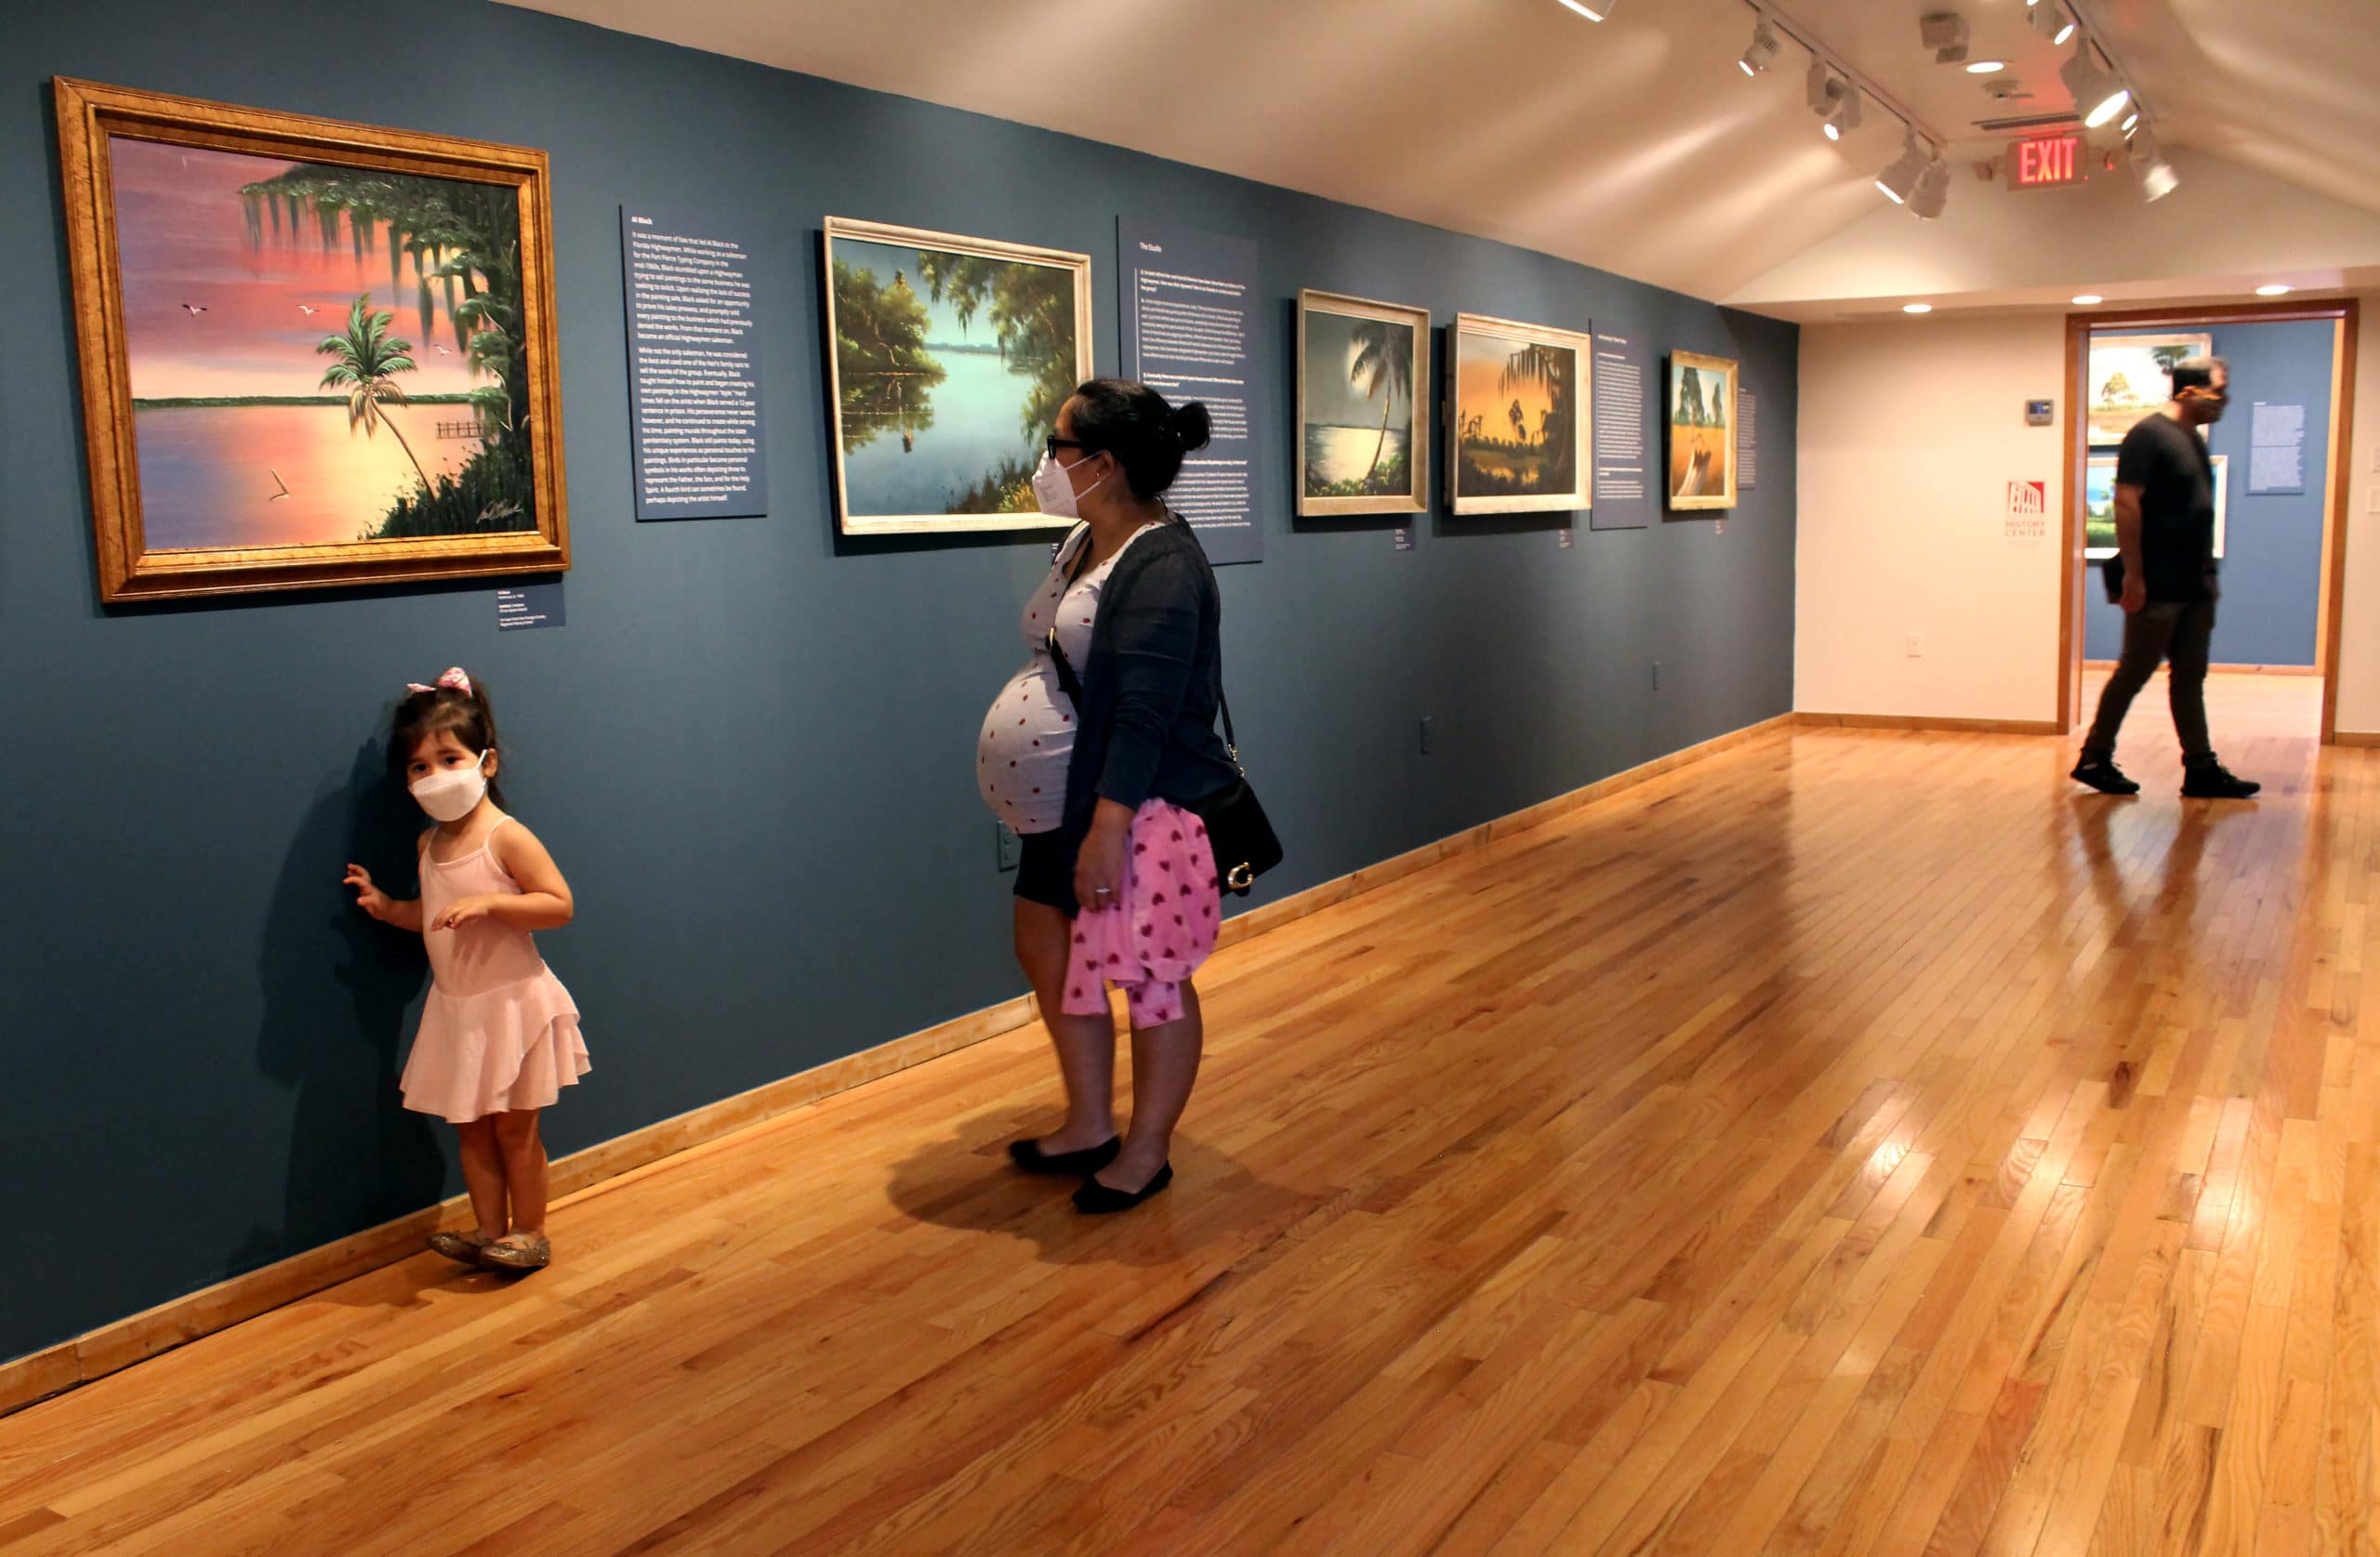 A latino family explores the gallery together